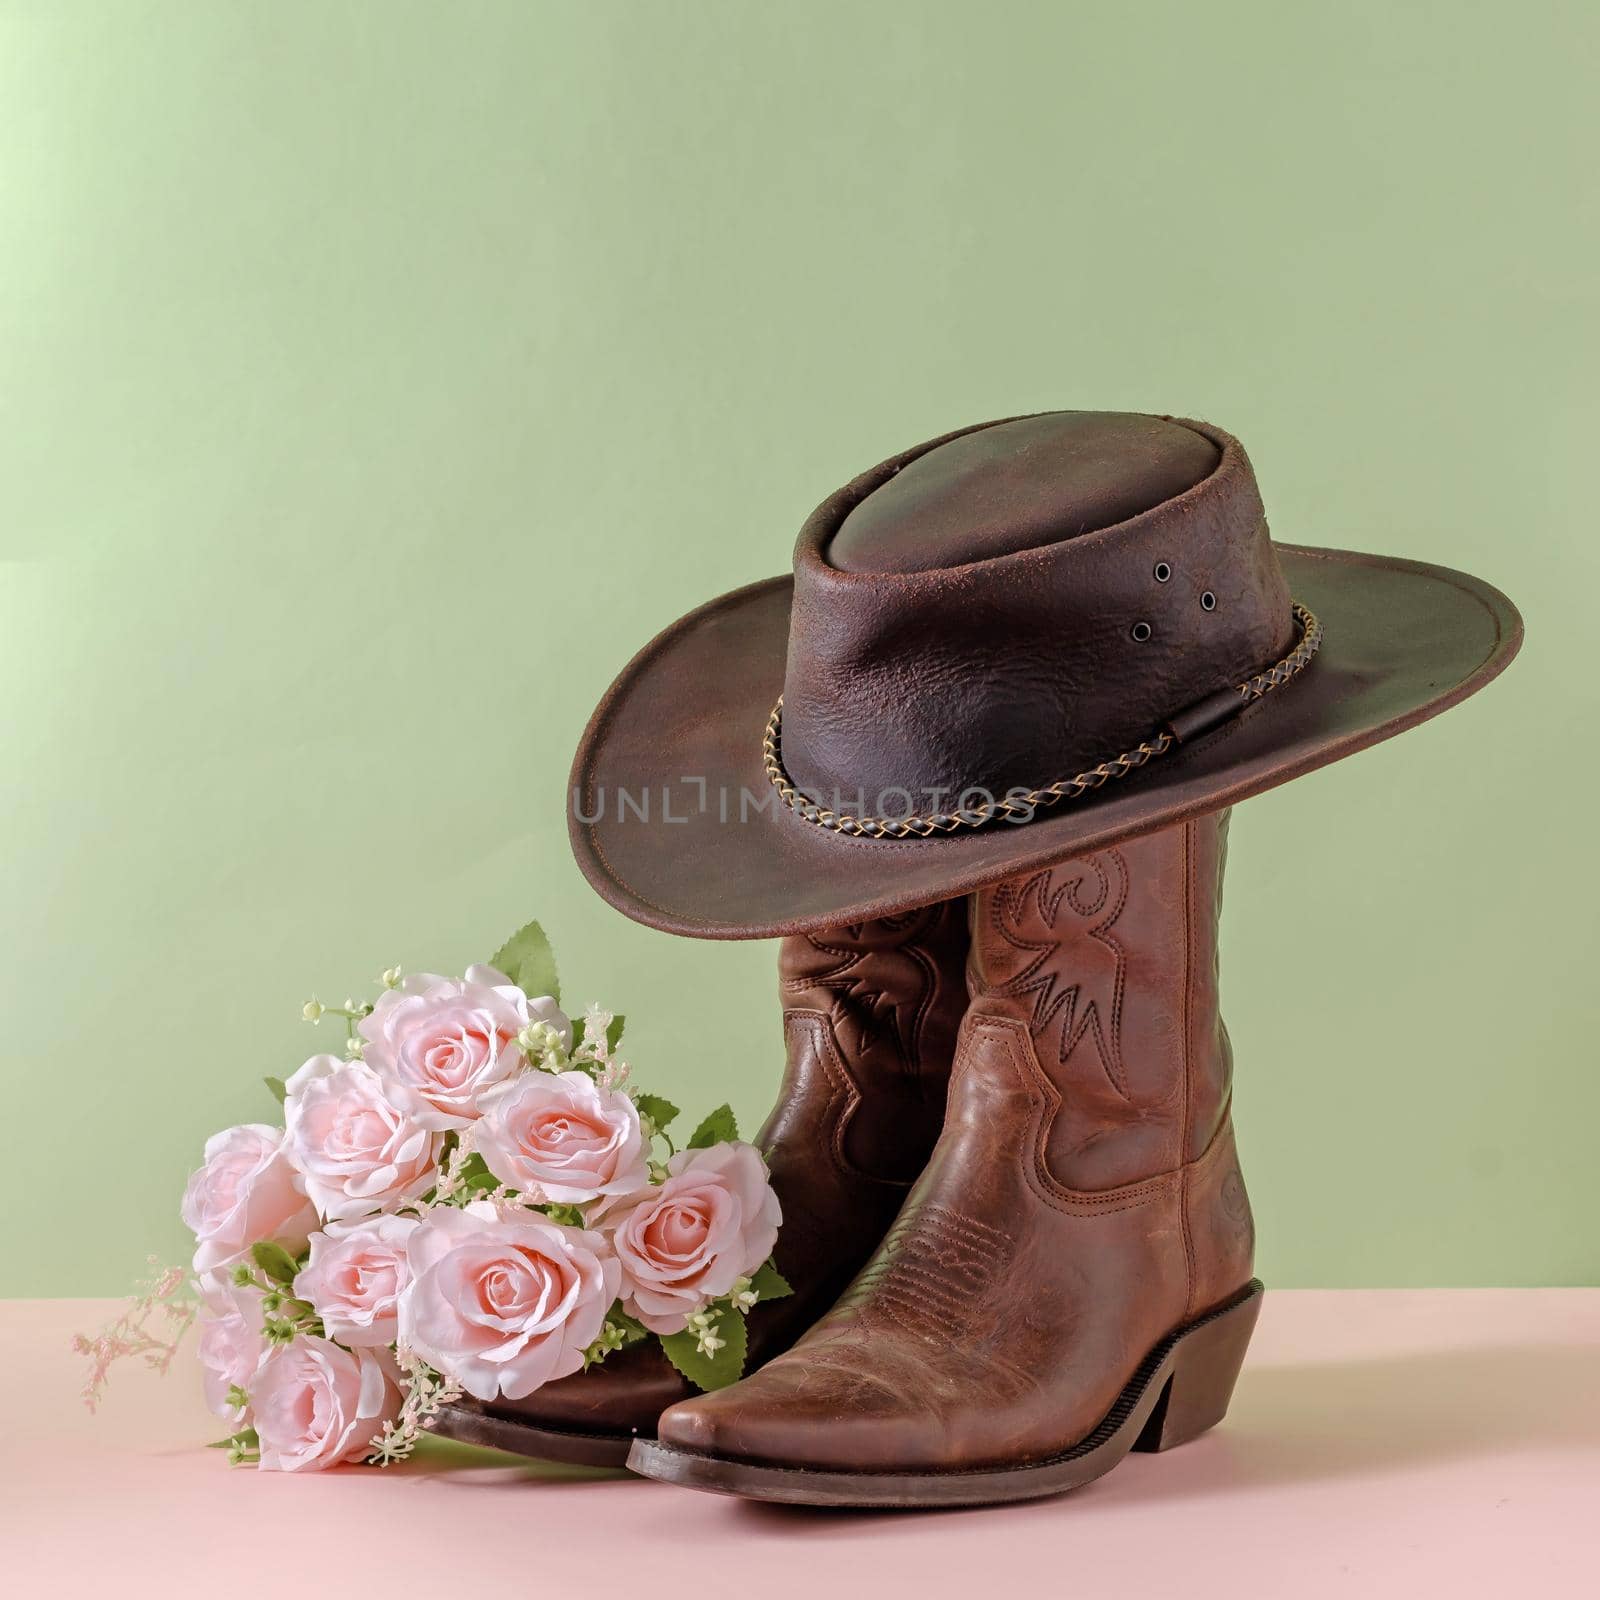 Cowboy boots shoes and hat and bouquet of rose flowers on green background minimal creative concept symbol of wild west america usa texas farm and party.